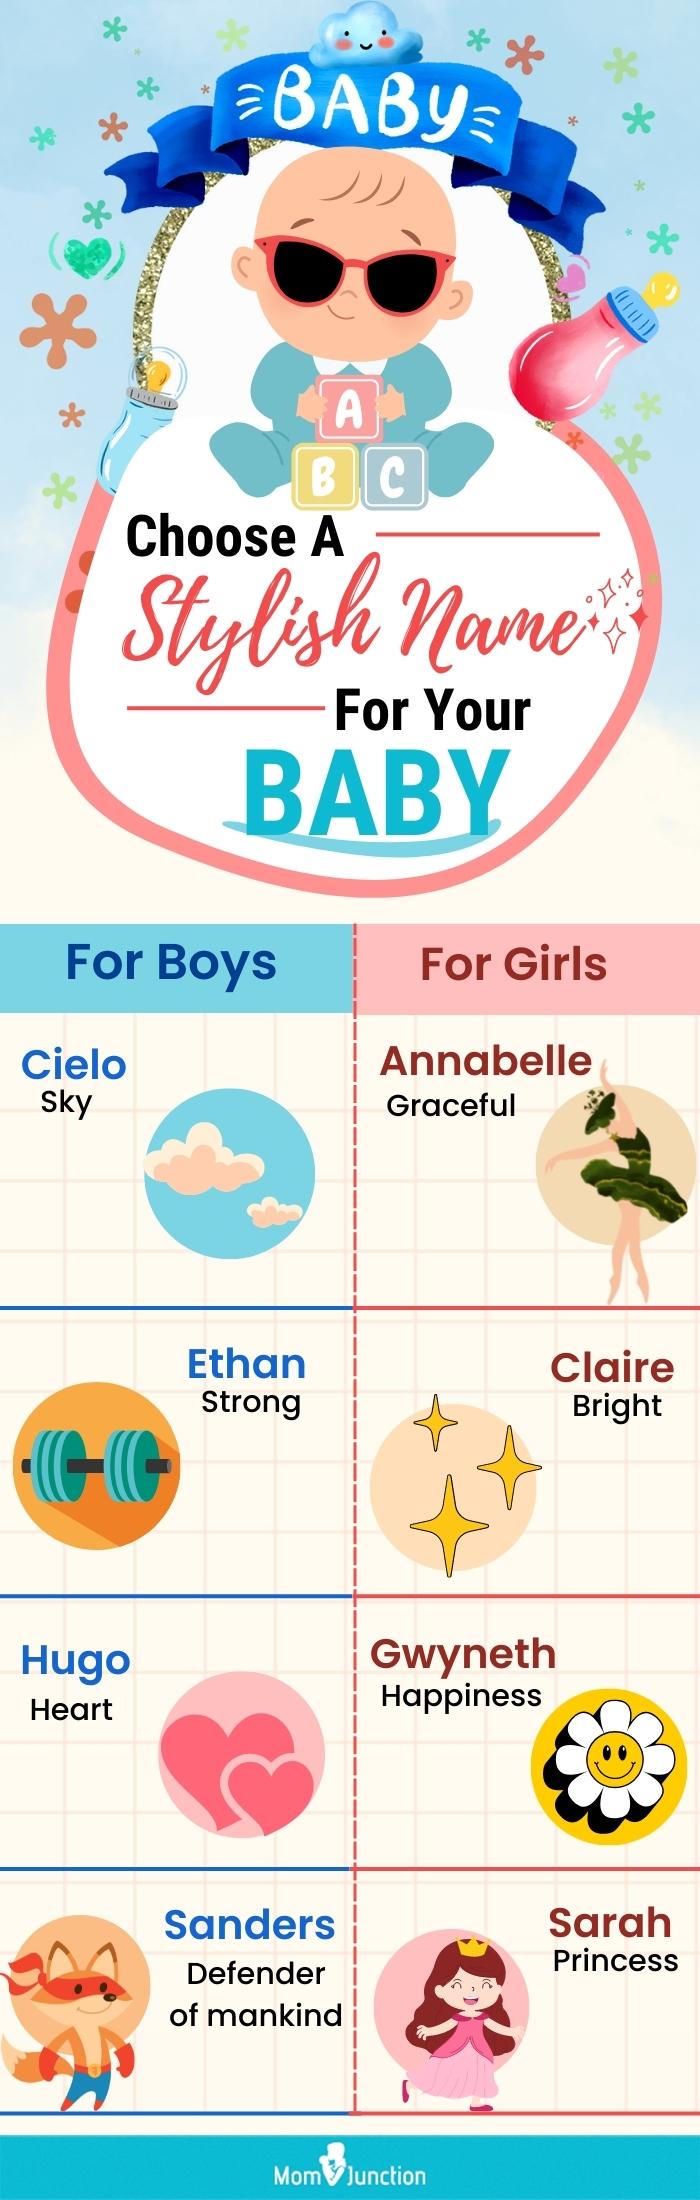 200 Elegant Baby Names That Are Posh And Fancy